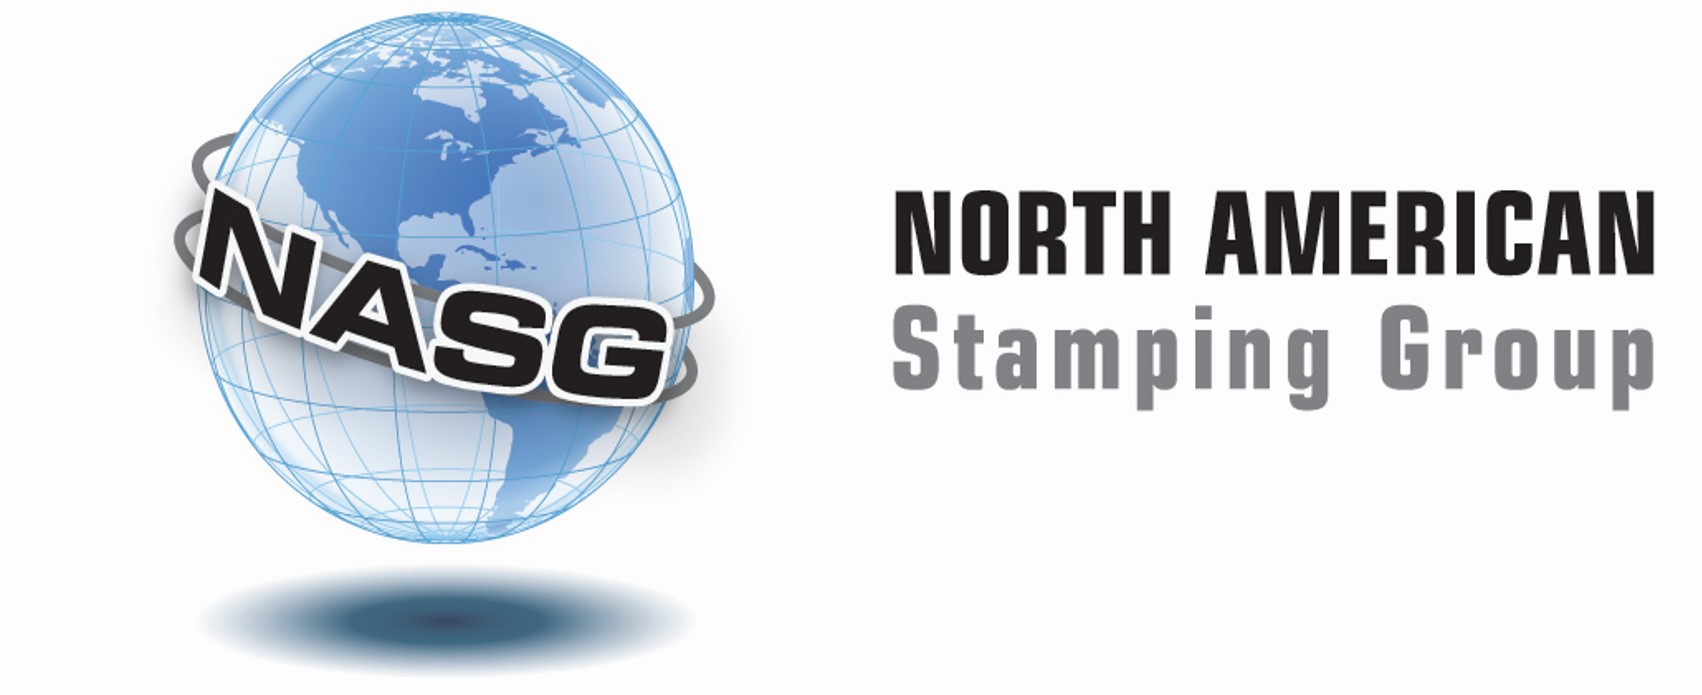 North American Stamping Group, LLC